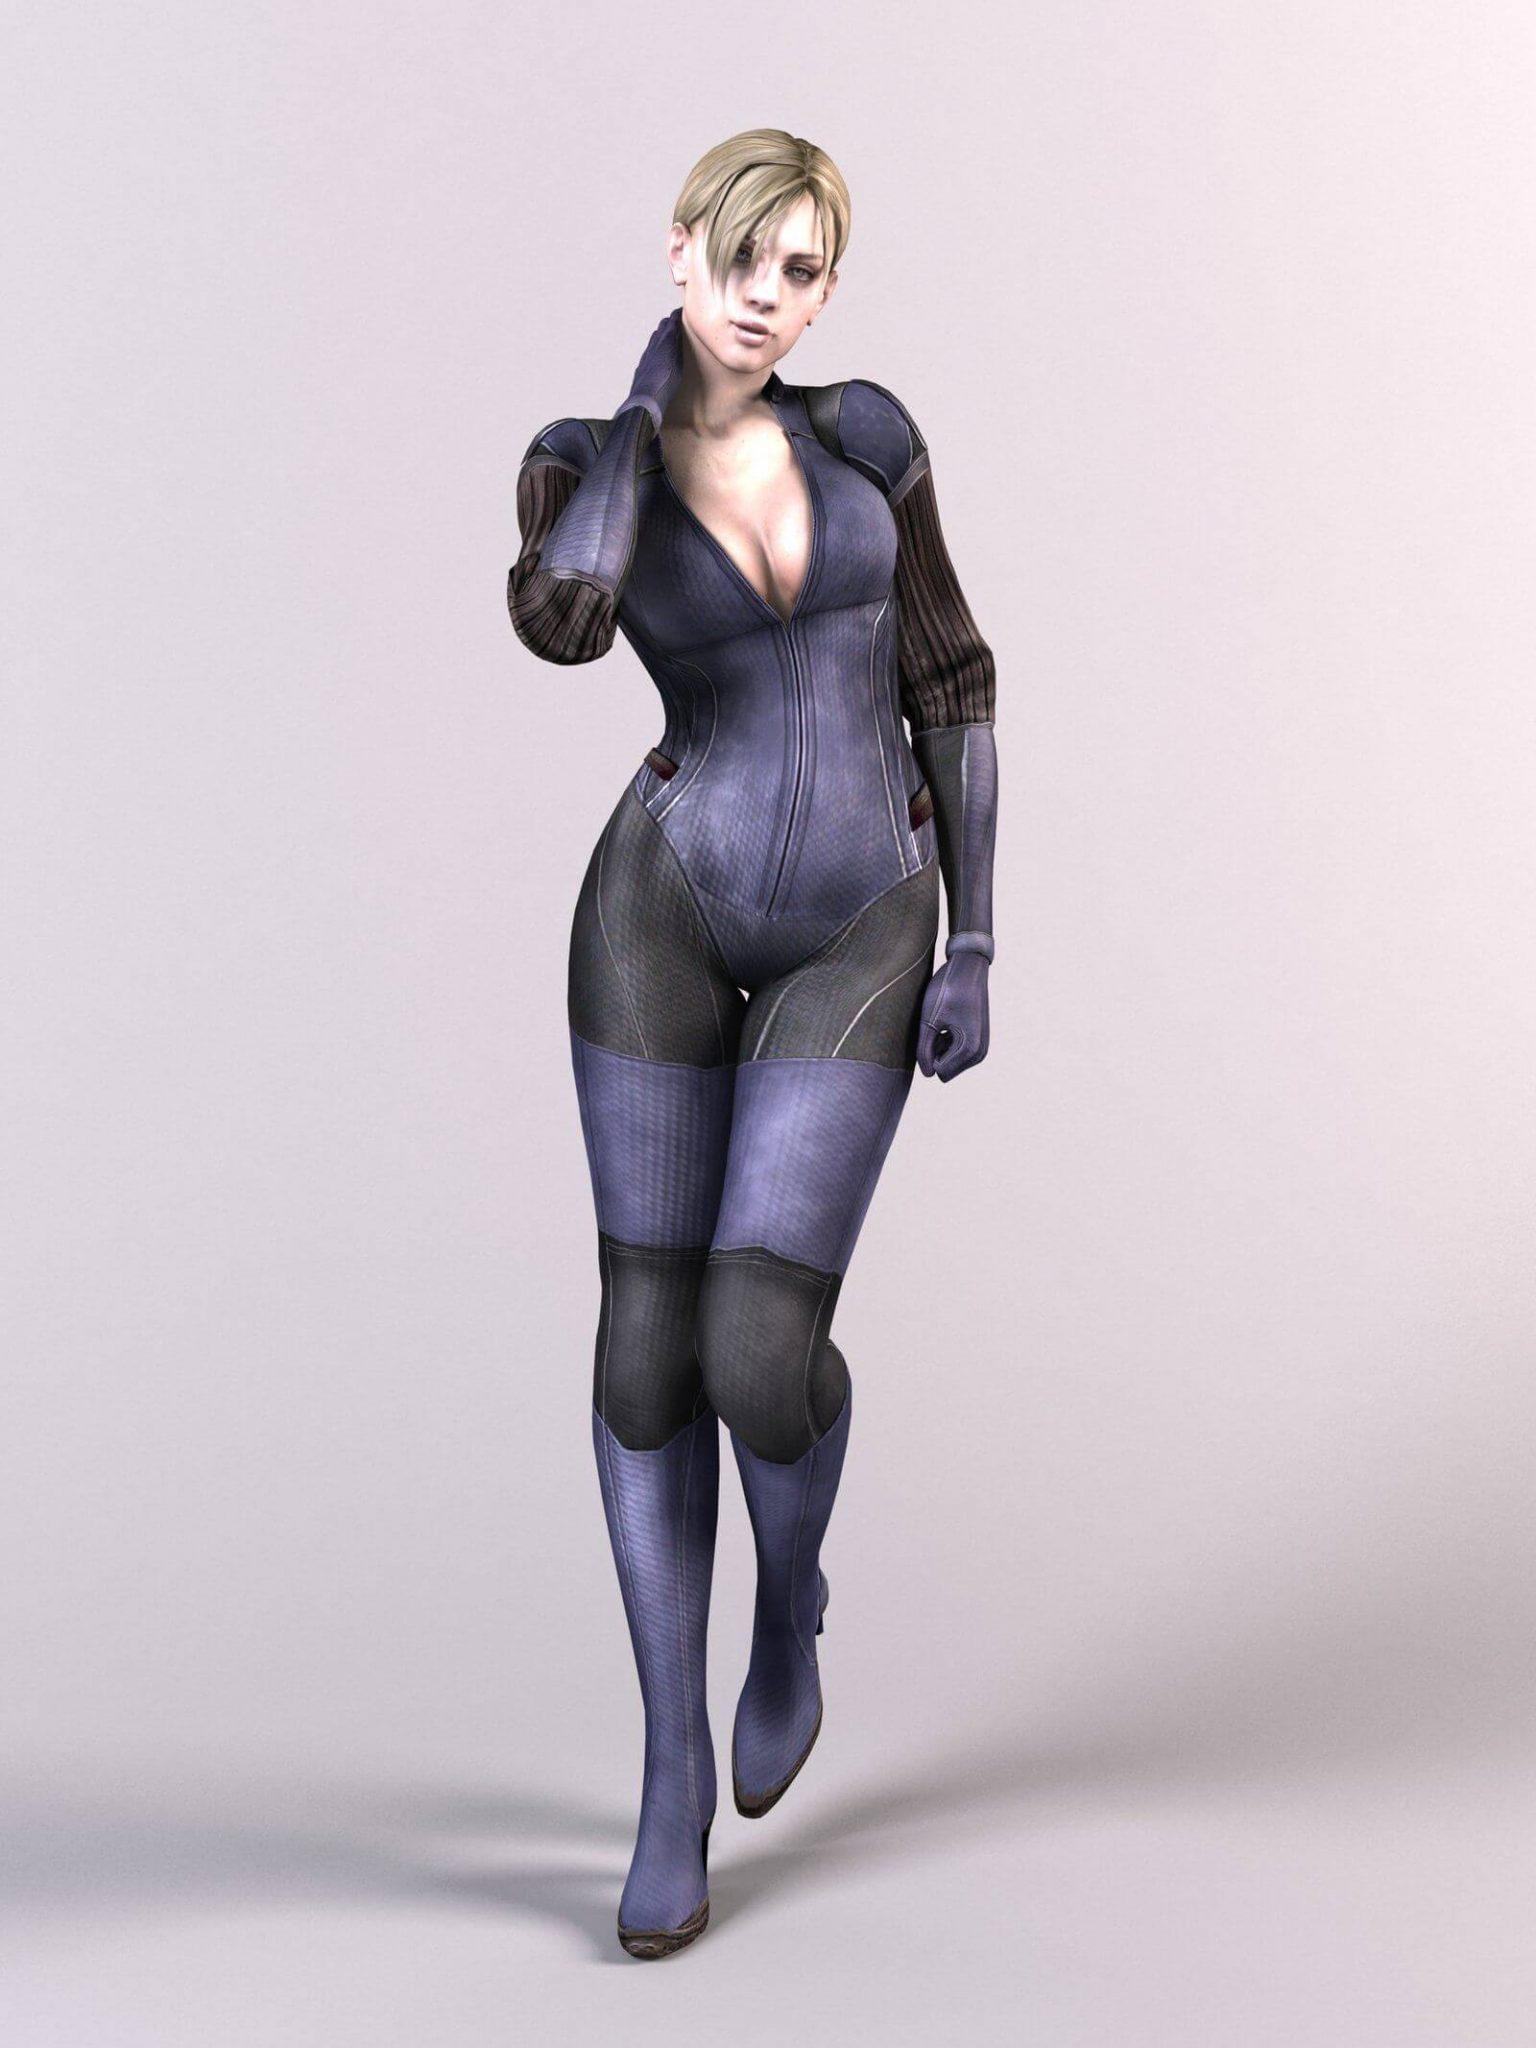 51 Jill Valentine Nude Pictures Will Spellbind You With Her Dazzling Body | Best Of Comic Books